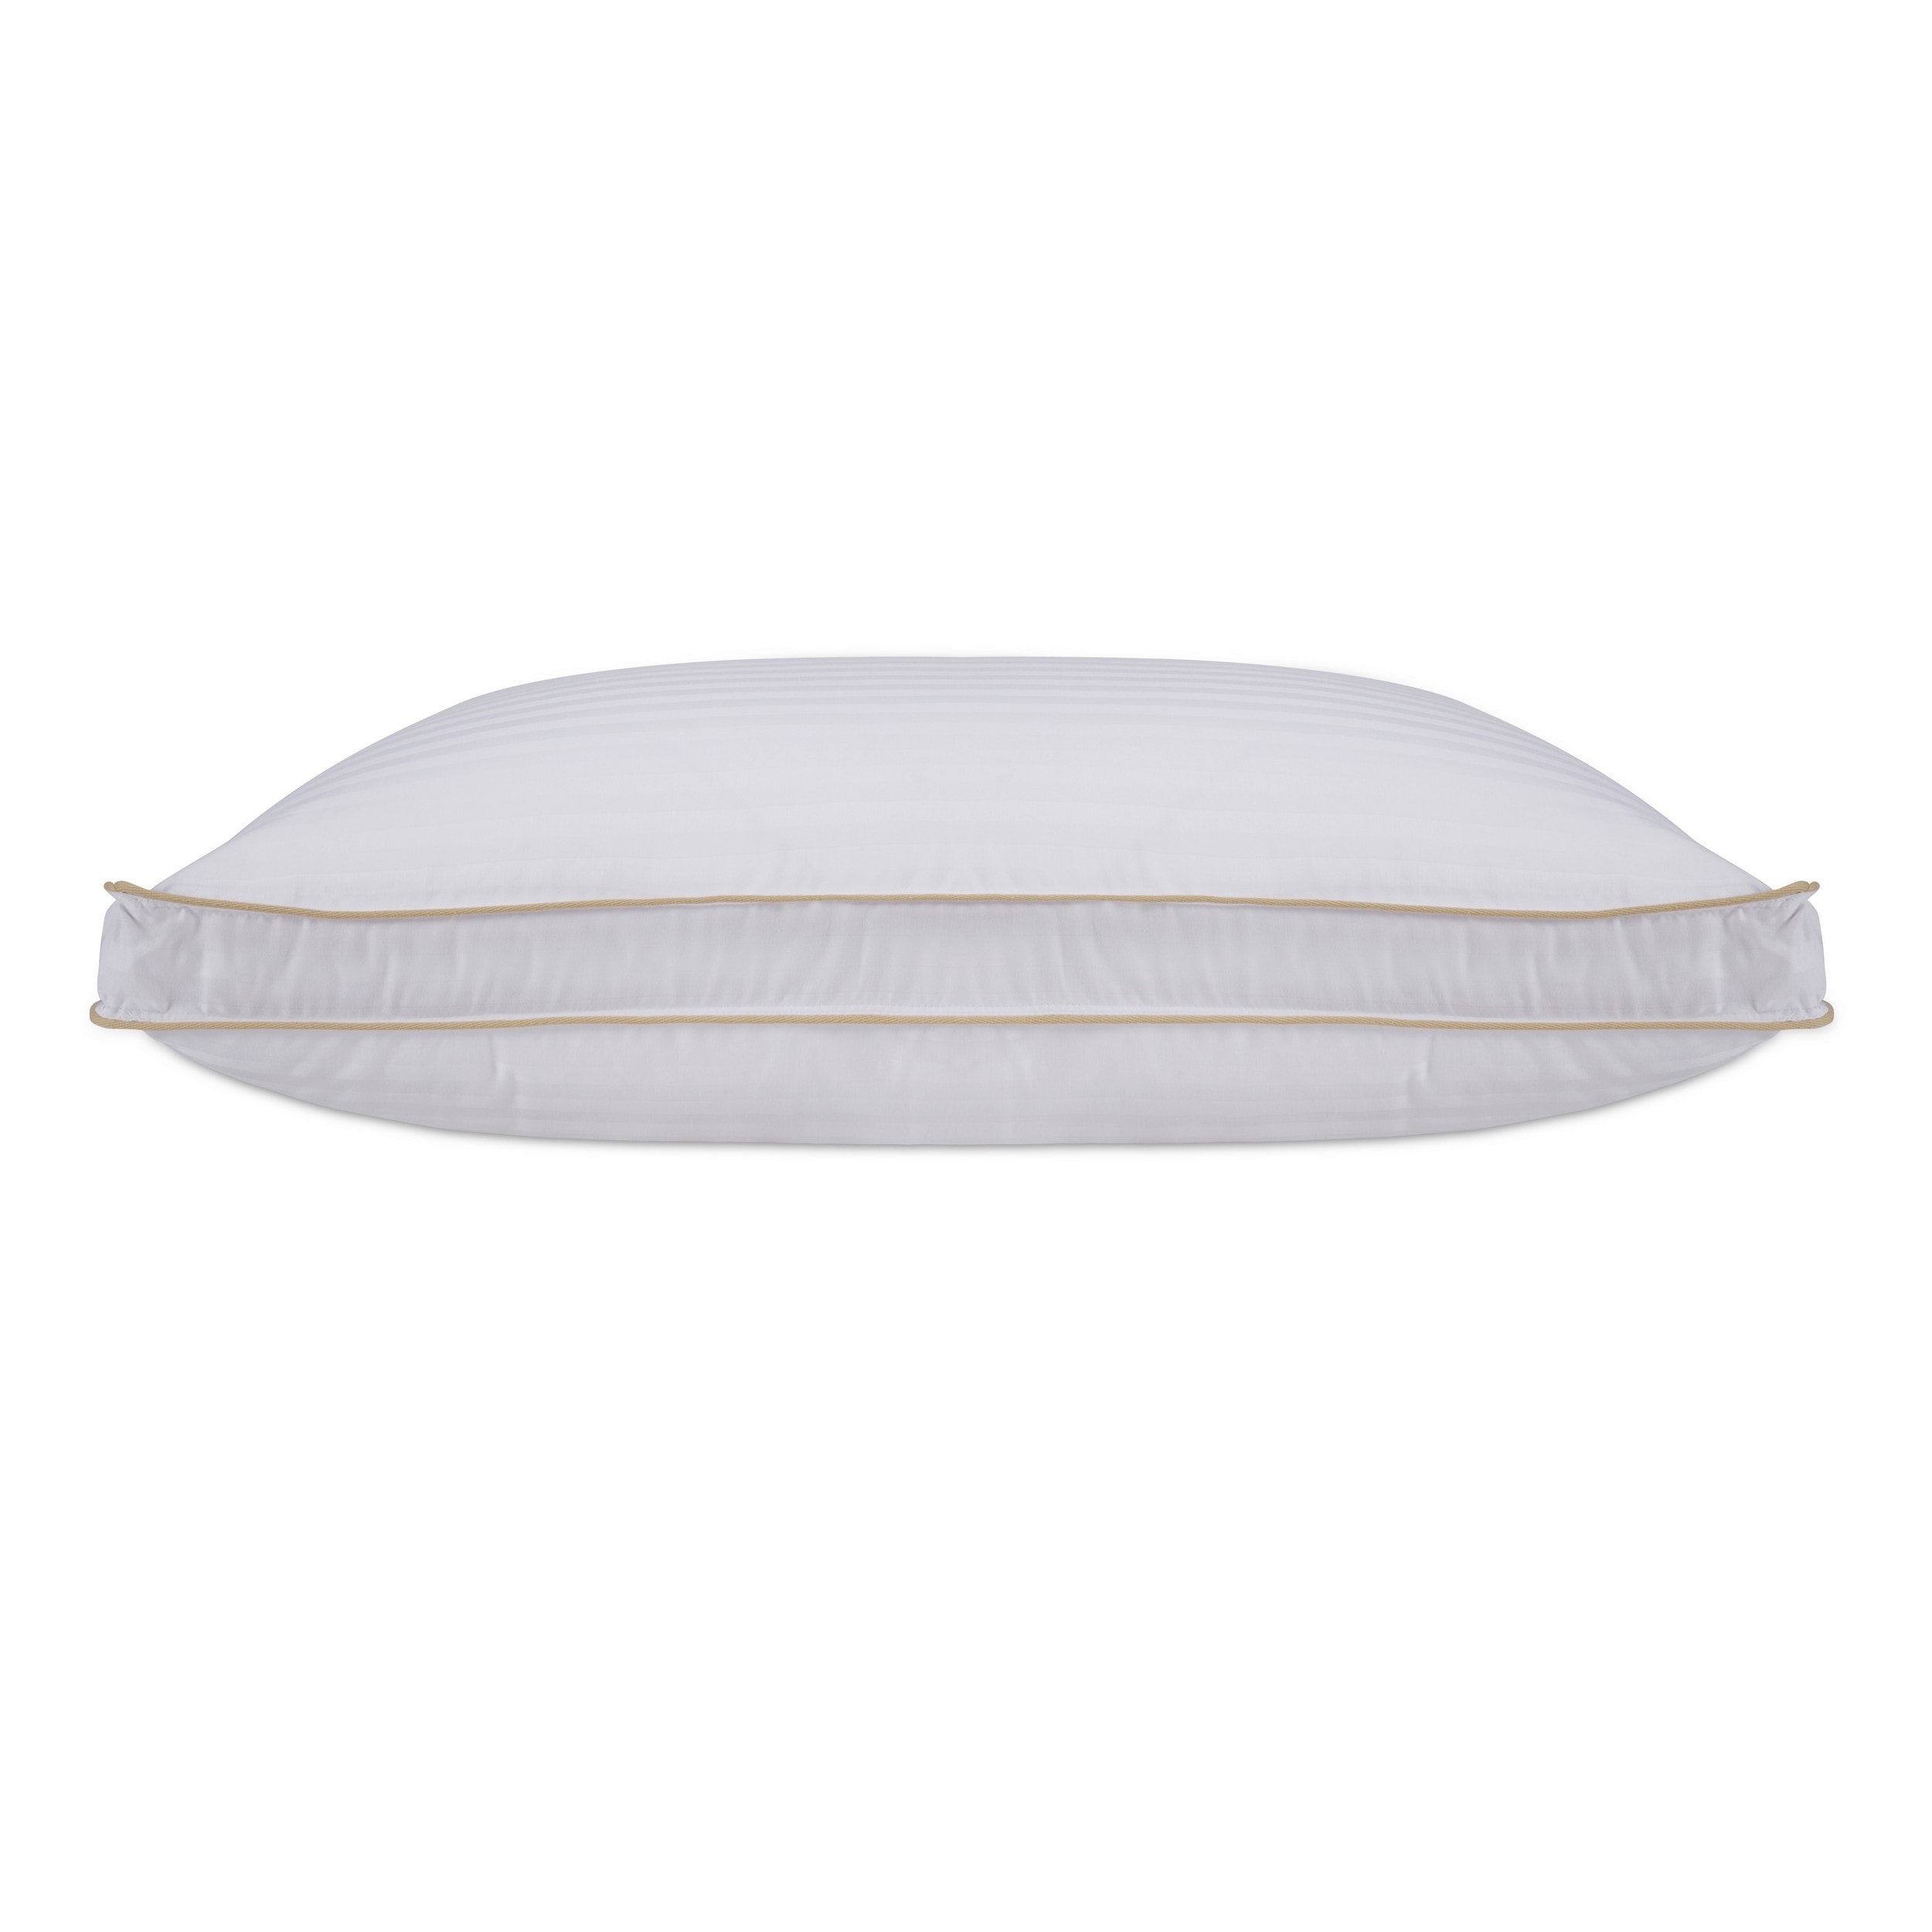 https://ak1.ostkcdn.com/images/products/11138462/Classic-Hyper-Cotton-White-Down-and-Feather-Standard-Size-Pillow-w-Protector-Set-of-2-Size-Standard-ca87c7ab-4c56-445b-bee1-acb8fb3c3b36.jpg